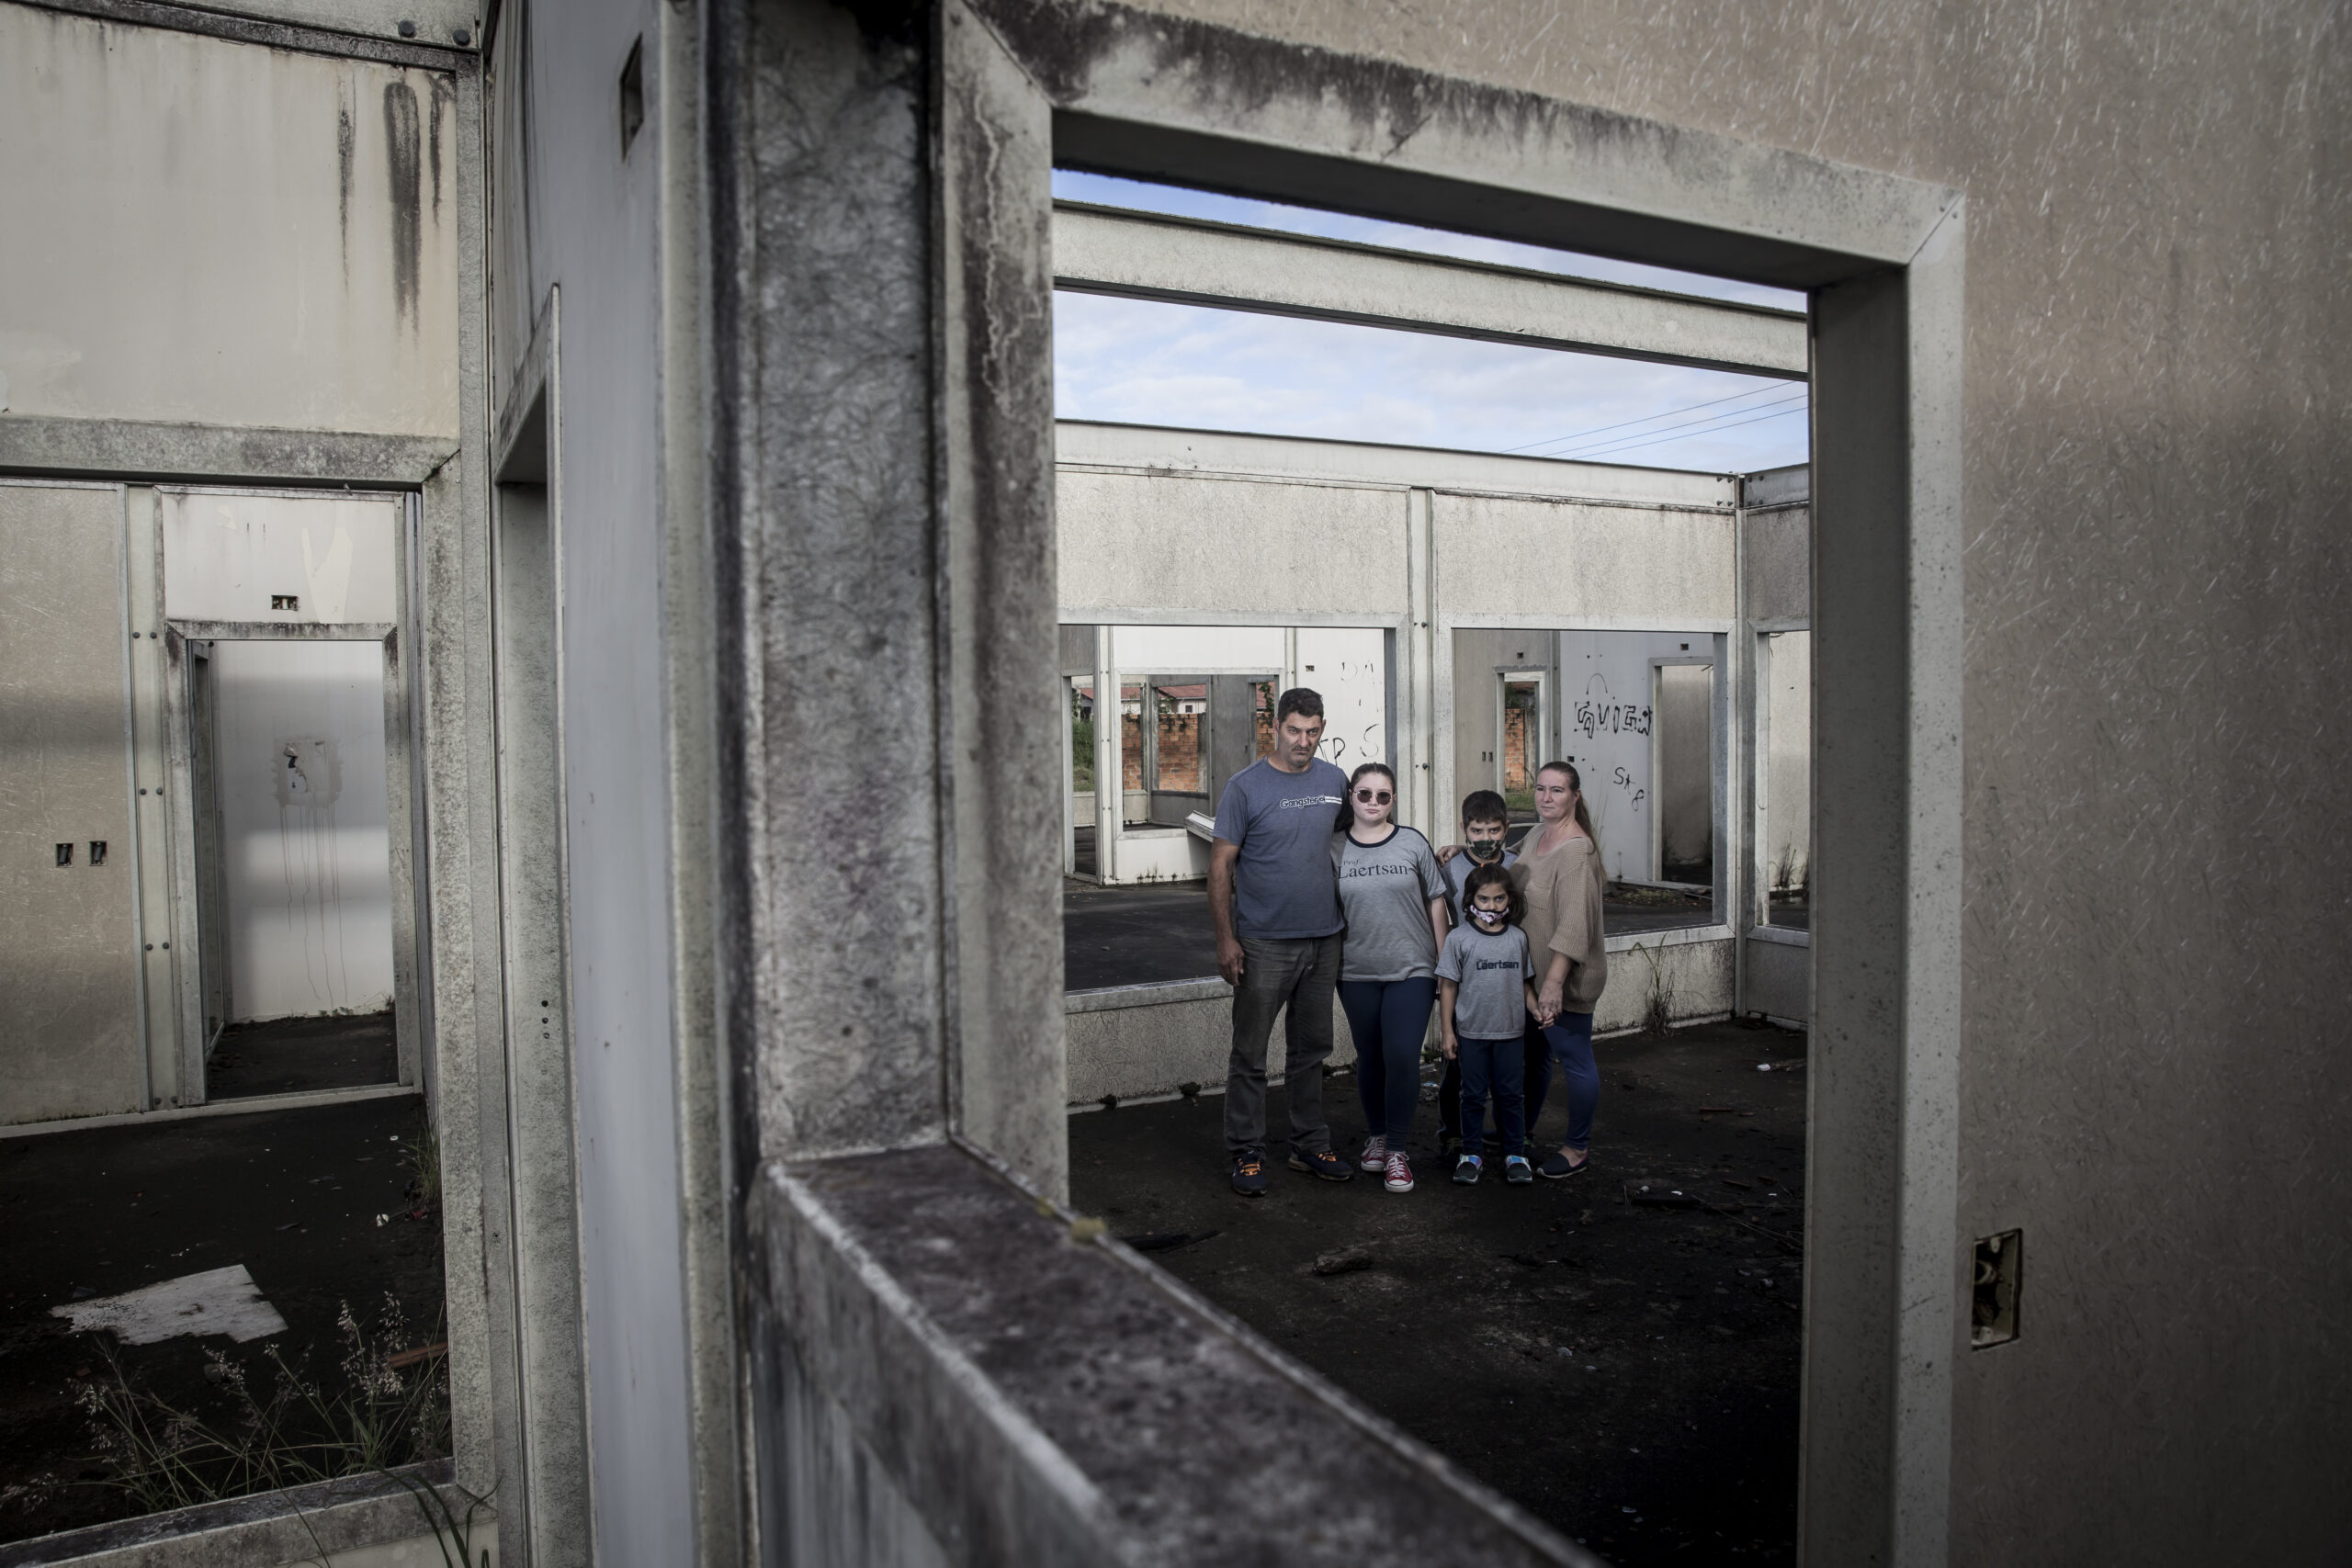 Sérgio and Janete Eberhardt with their three children in what was to be the Alliance Park School, in Terra de Areia, on the North Coast. The unfinished work was part of the Proinfância program, launched 10 years ago by the federal government. André Ávila/Agencia RBS